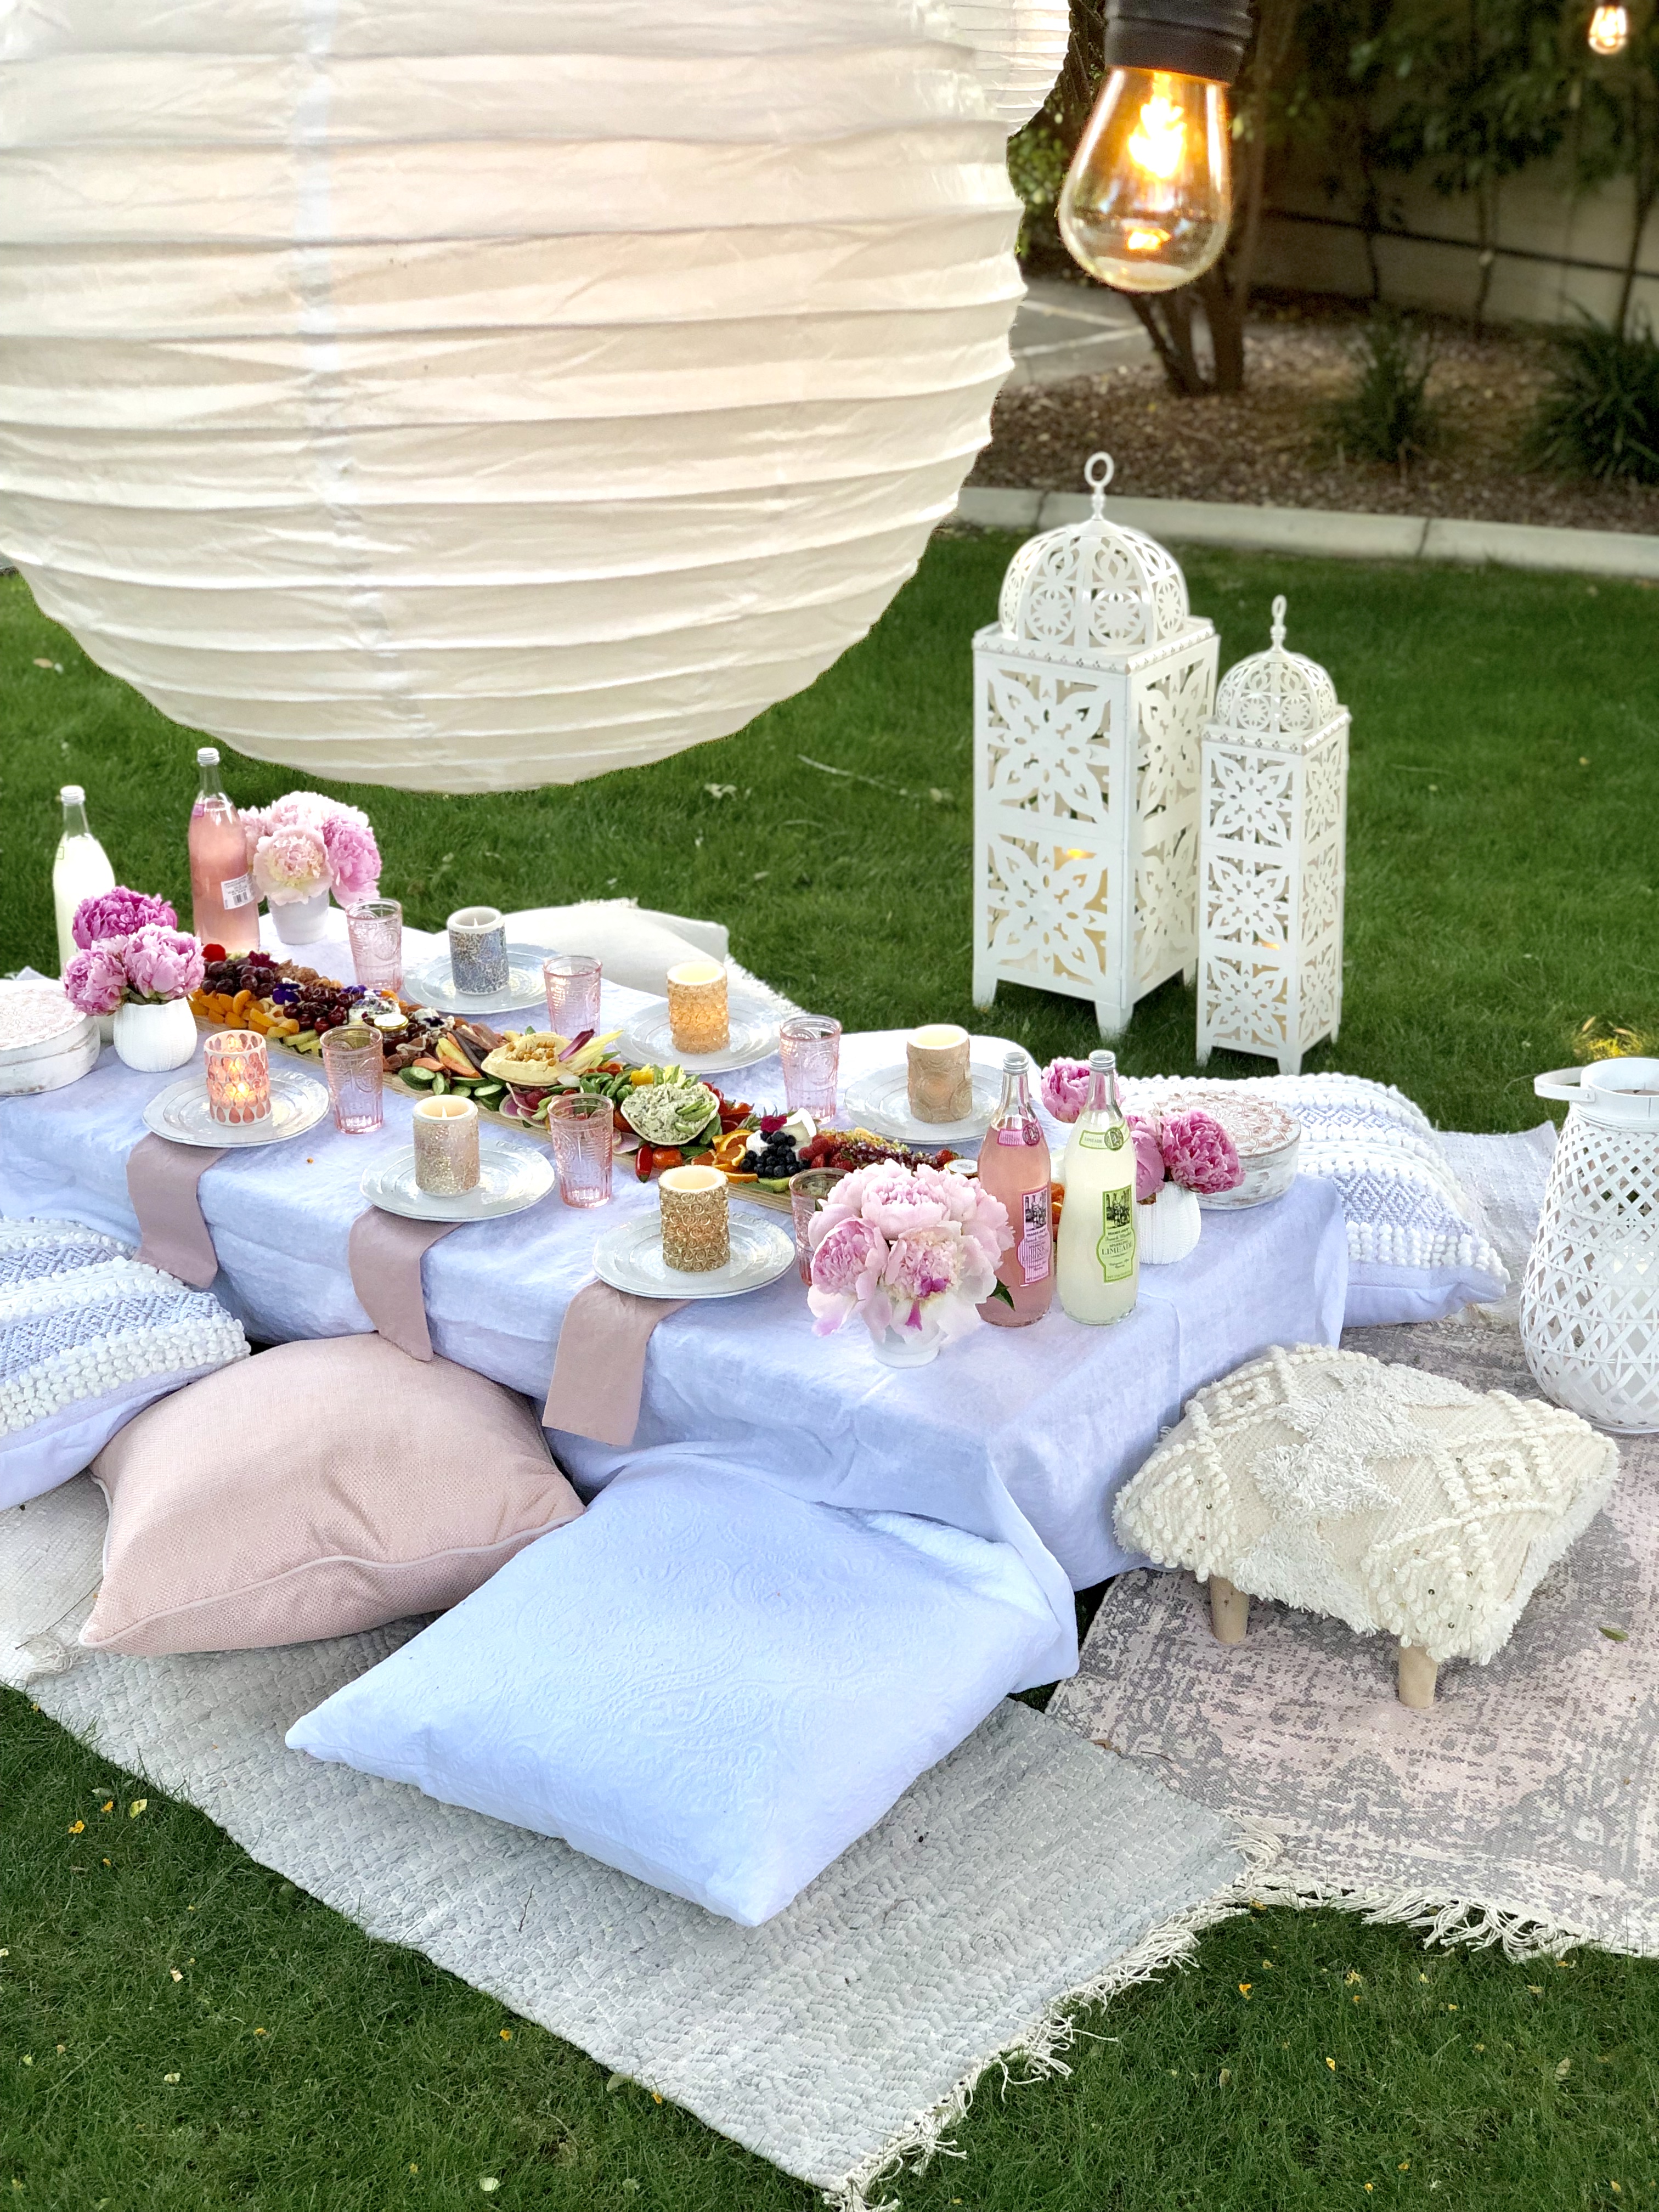 Moroccan Party: Picnic on the Lawn - to have + to host